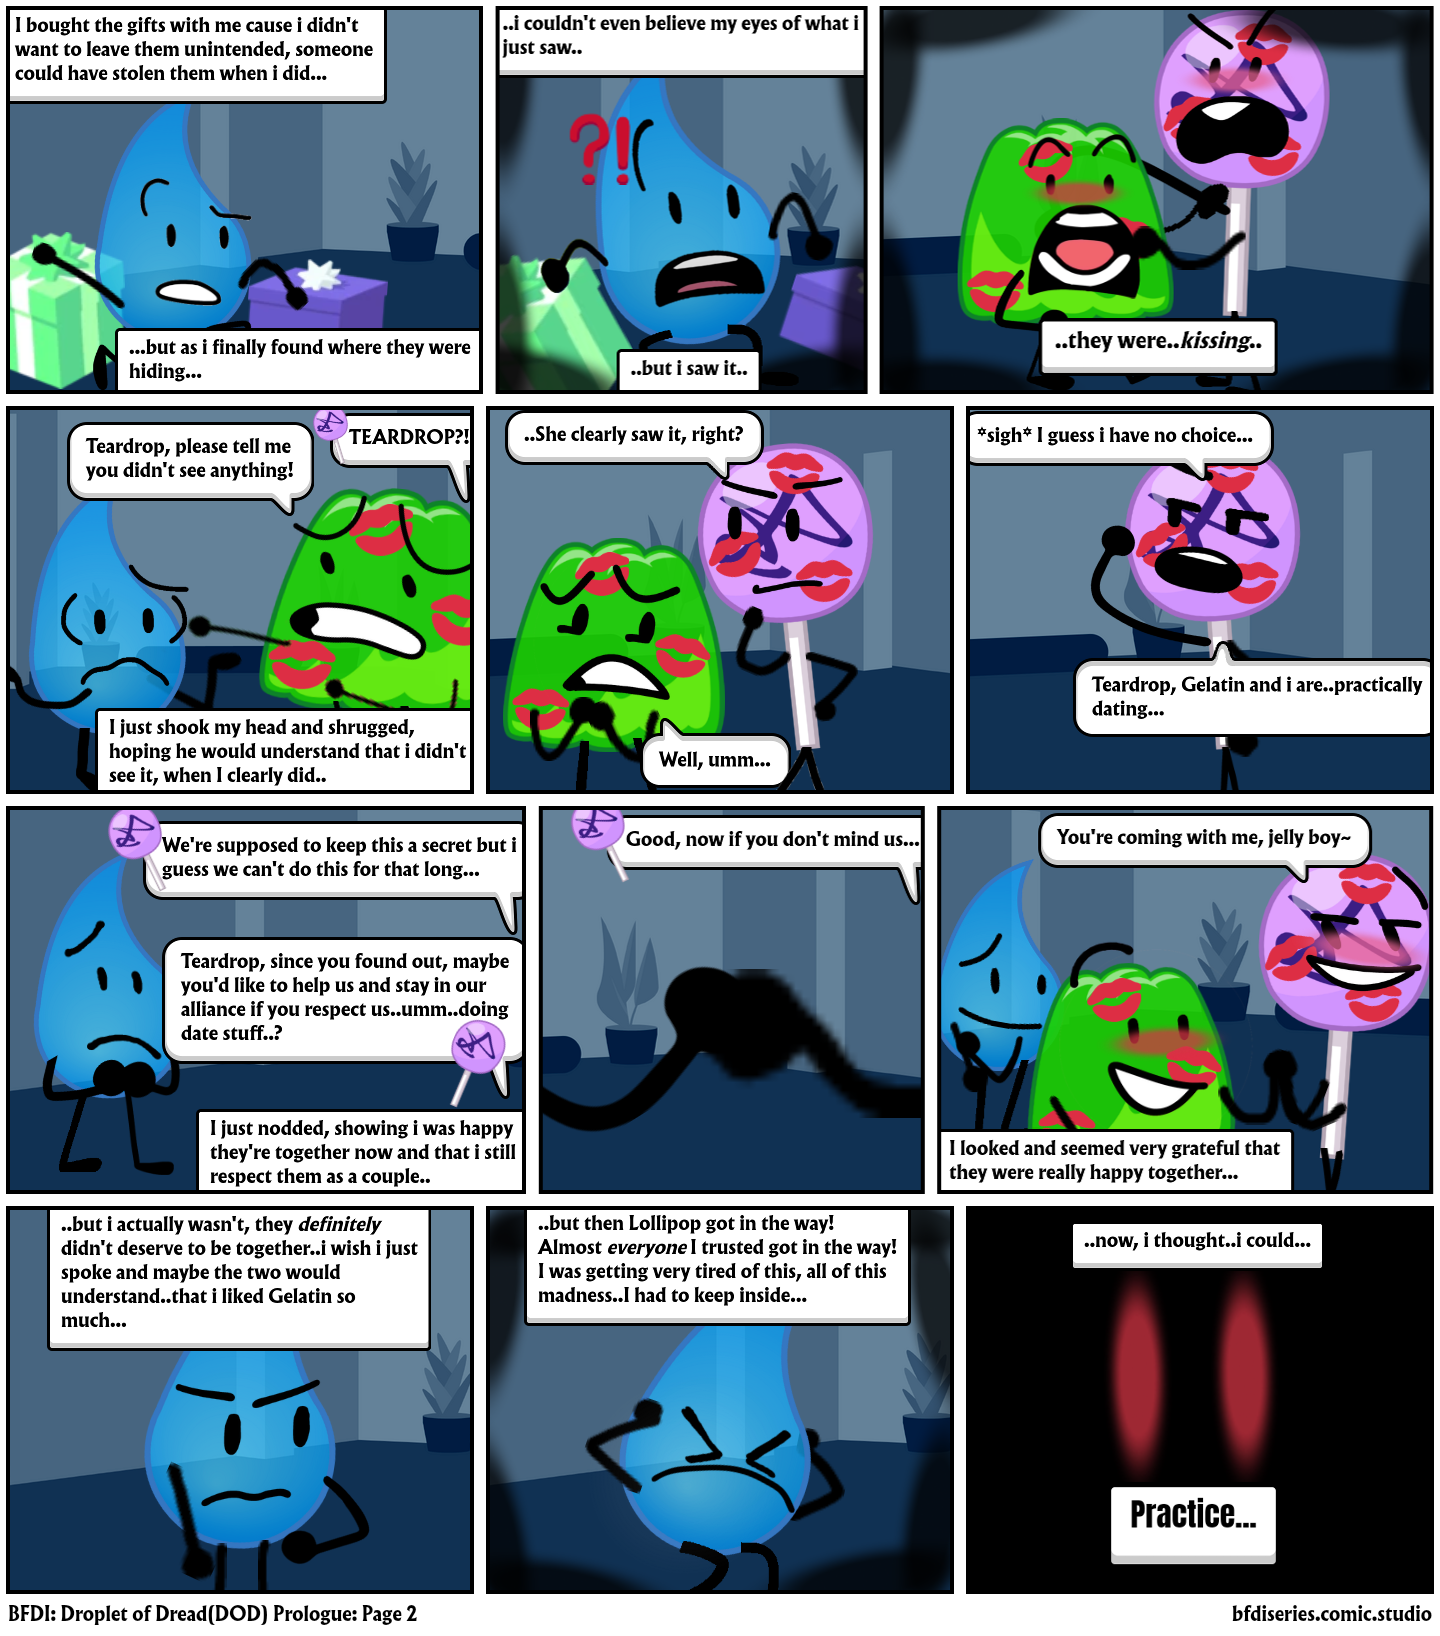 BFDI: Droplet of Dread(DOD) Prologue: Page 2